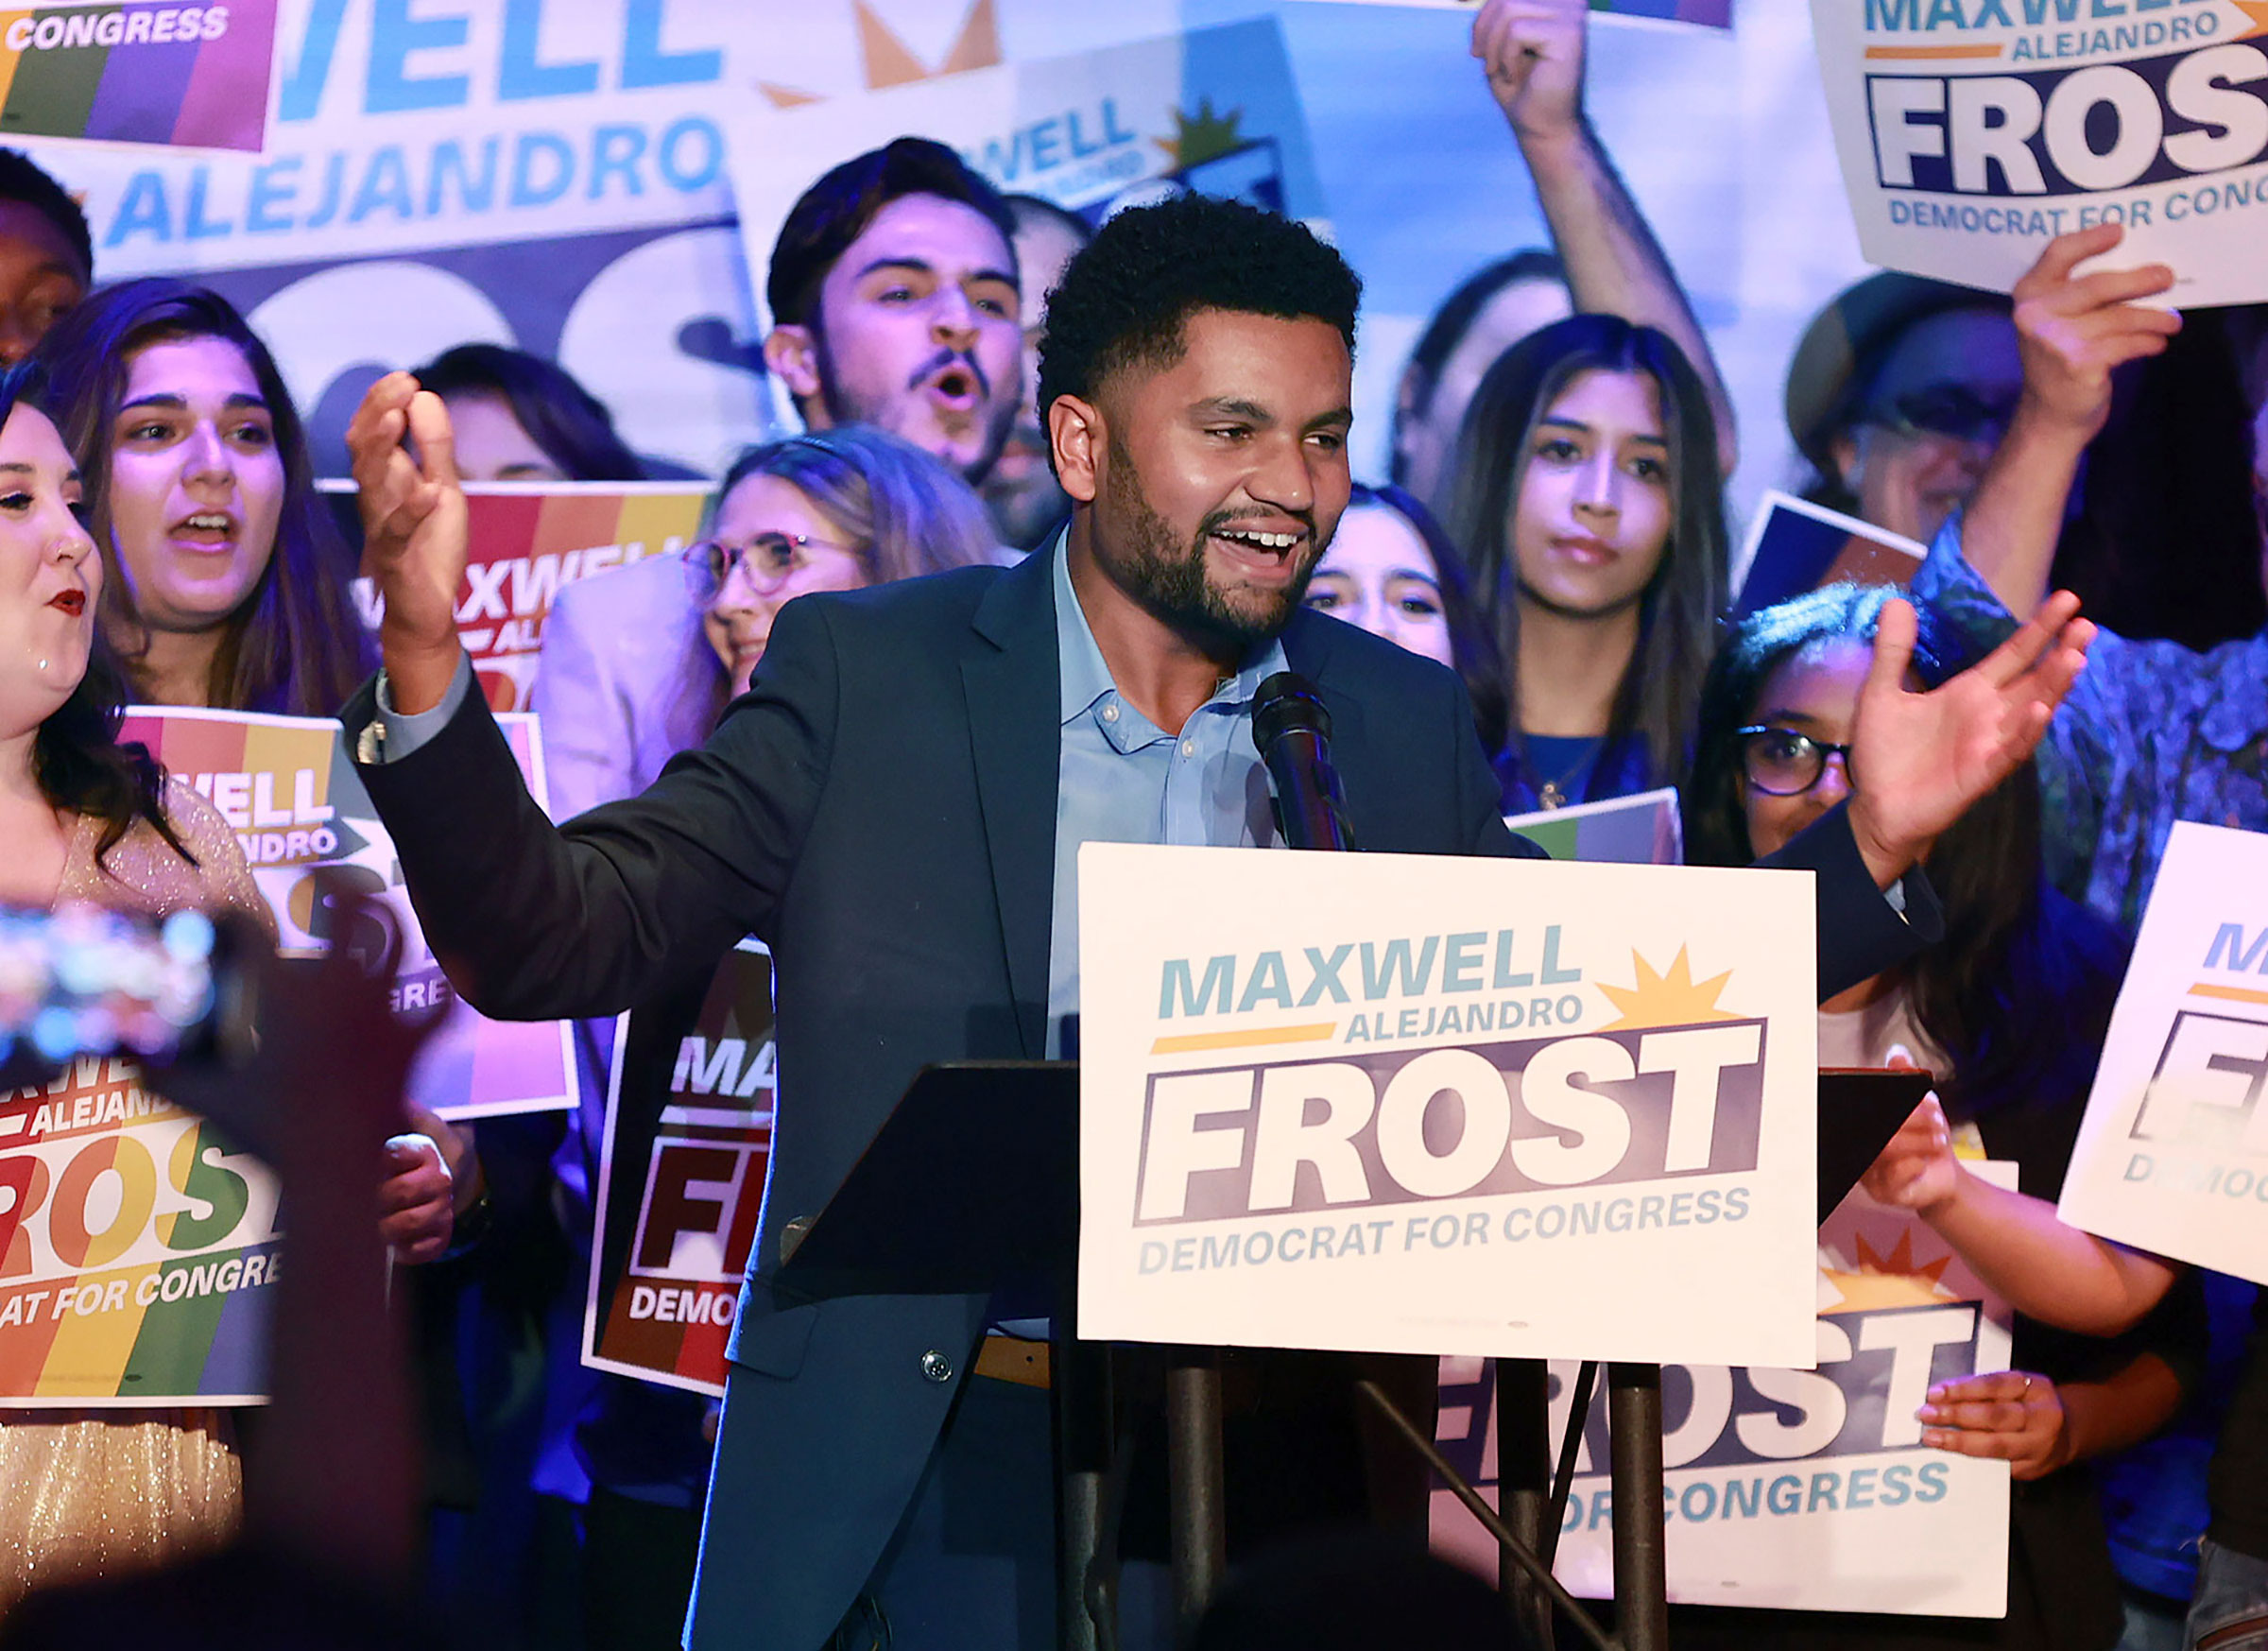 Democratic candidate for Florida's 10th Congressional District Maxwell Frost speaks as he celebrates with supporters during a victory party at The Abbey in Orlando, Fla., on Nov. 8, 2022. (Stephen M. Dowell—Orlando Sentinel/AP)